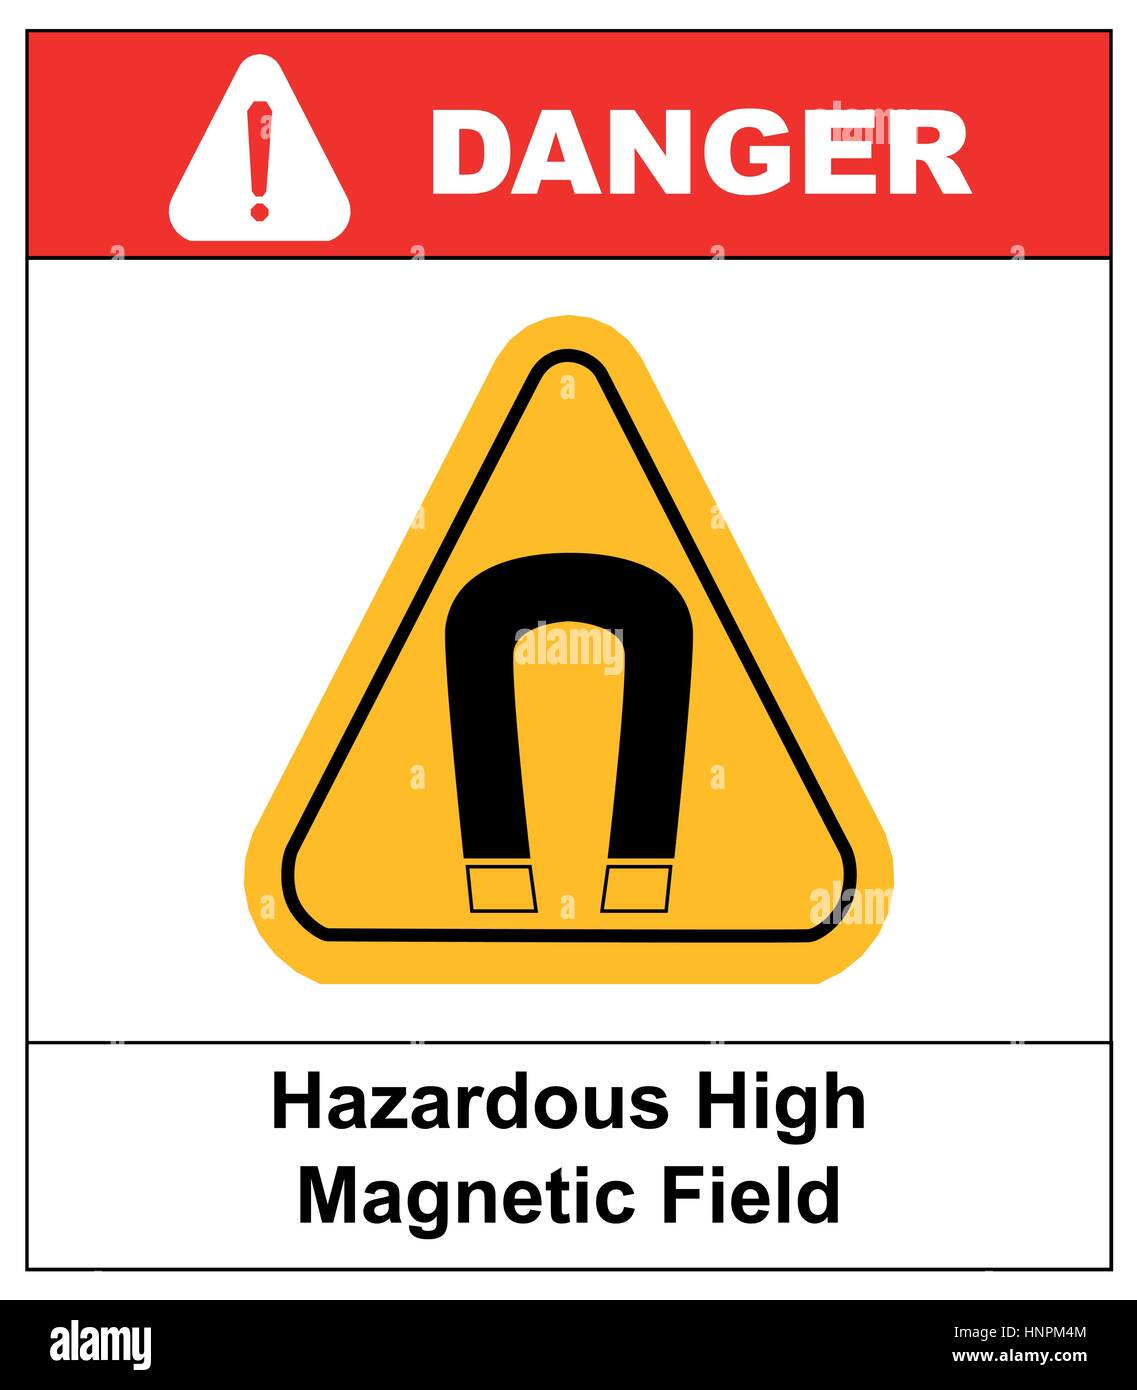 Caution Danger Warning strong magnetic field A4 210x297 A5 148x210 Sign Sticker 